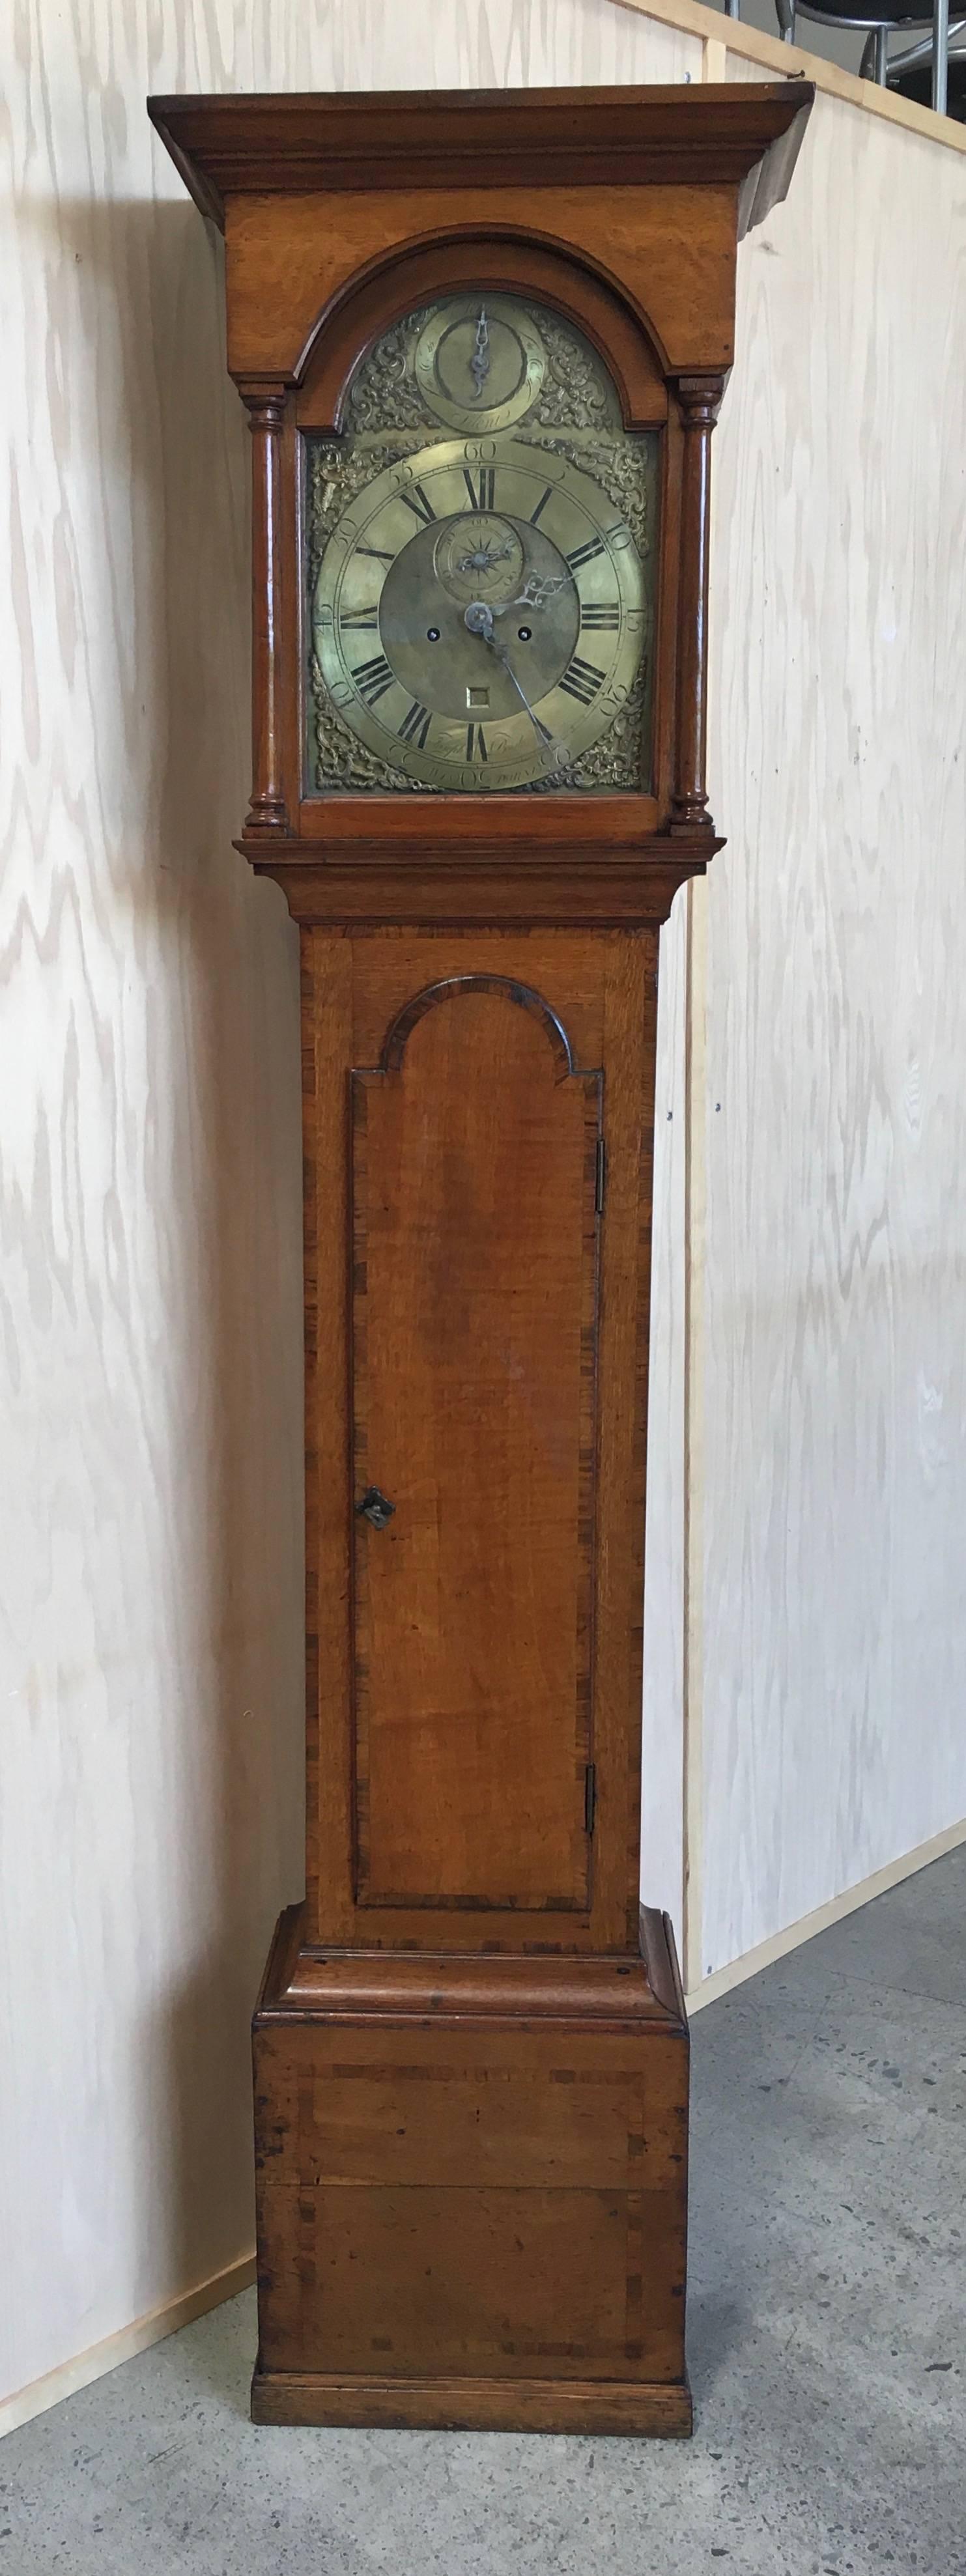 18th century antique 8 day Grand Father clock with second hand and calendar made in England the case is oak with mahogany crossbanding and it strikes a bell on the hour also has silent feature.